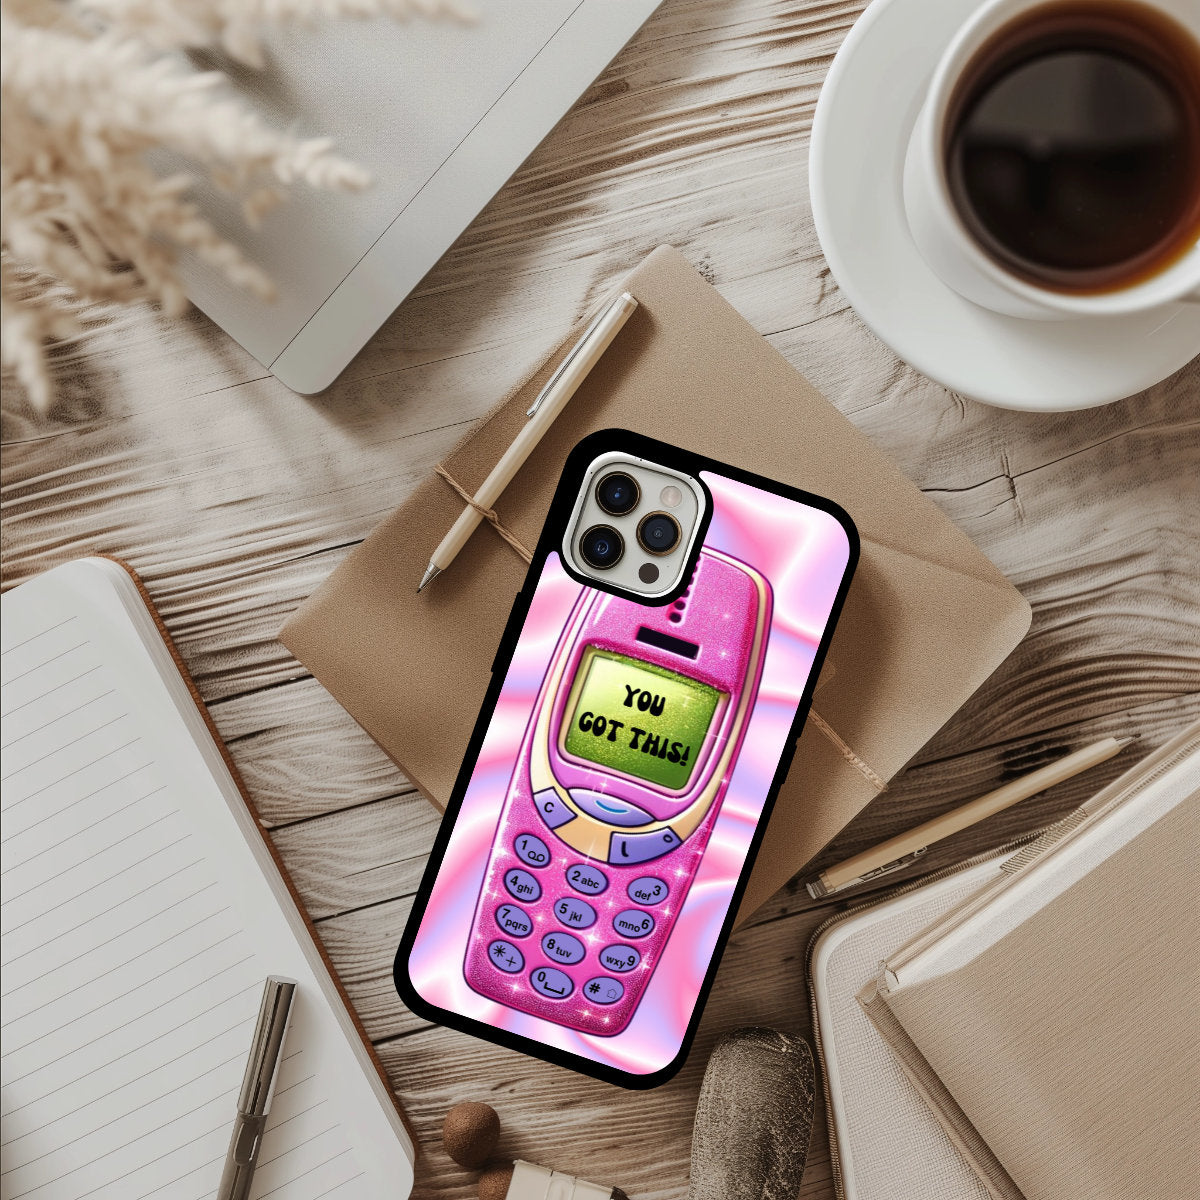 Retro Phone Case perfect gift for her - cute phone case - best birthday gift - iphone case - girly phone case - nokia phone case - Y2k